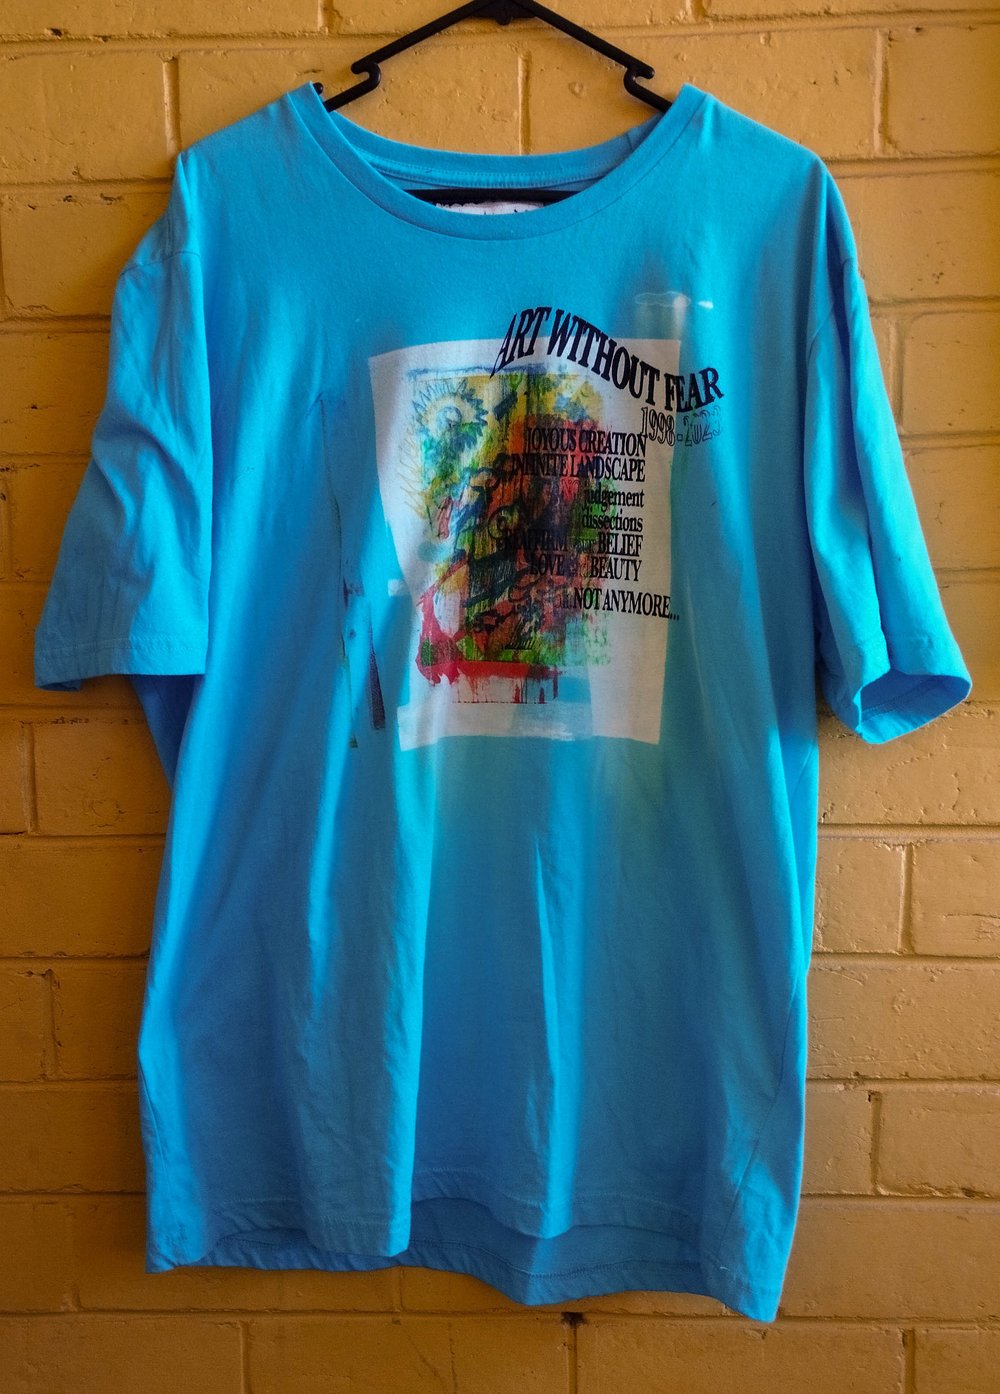 ART WITHOUT FEAR t-shirt